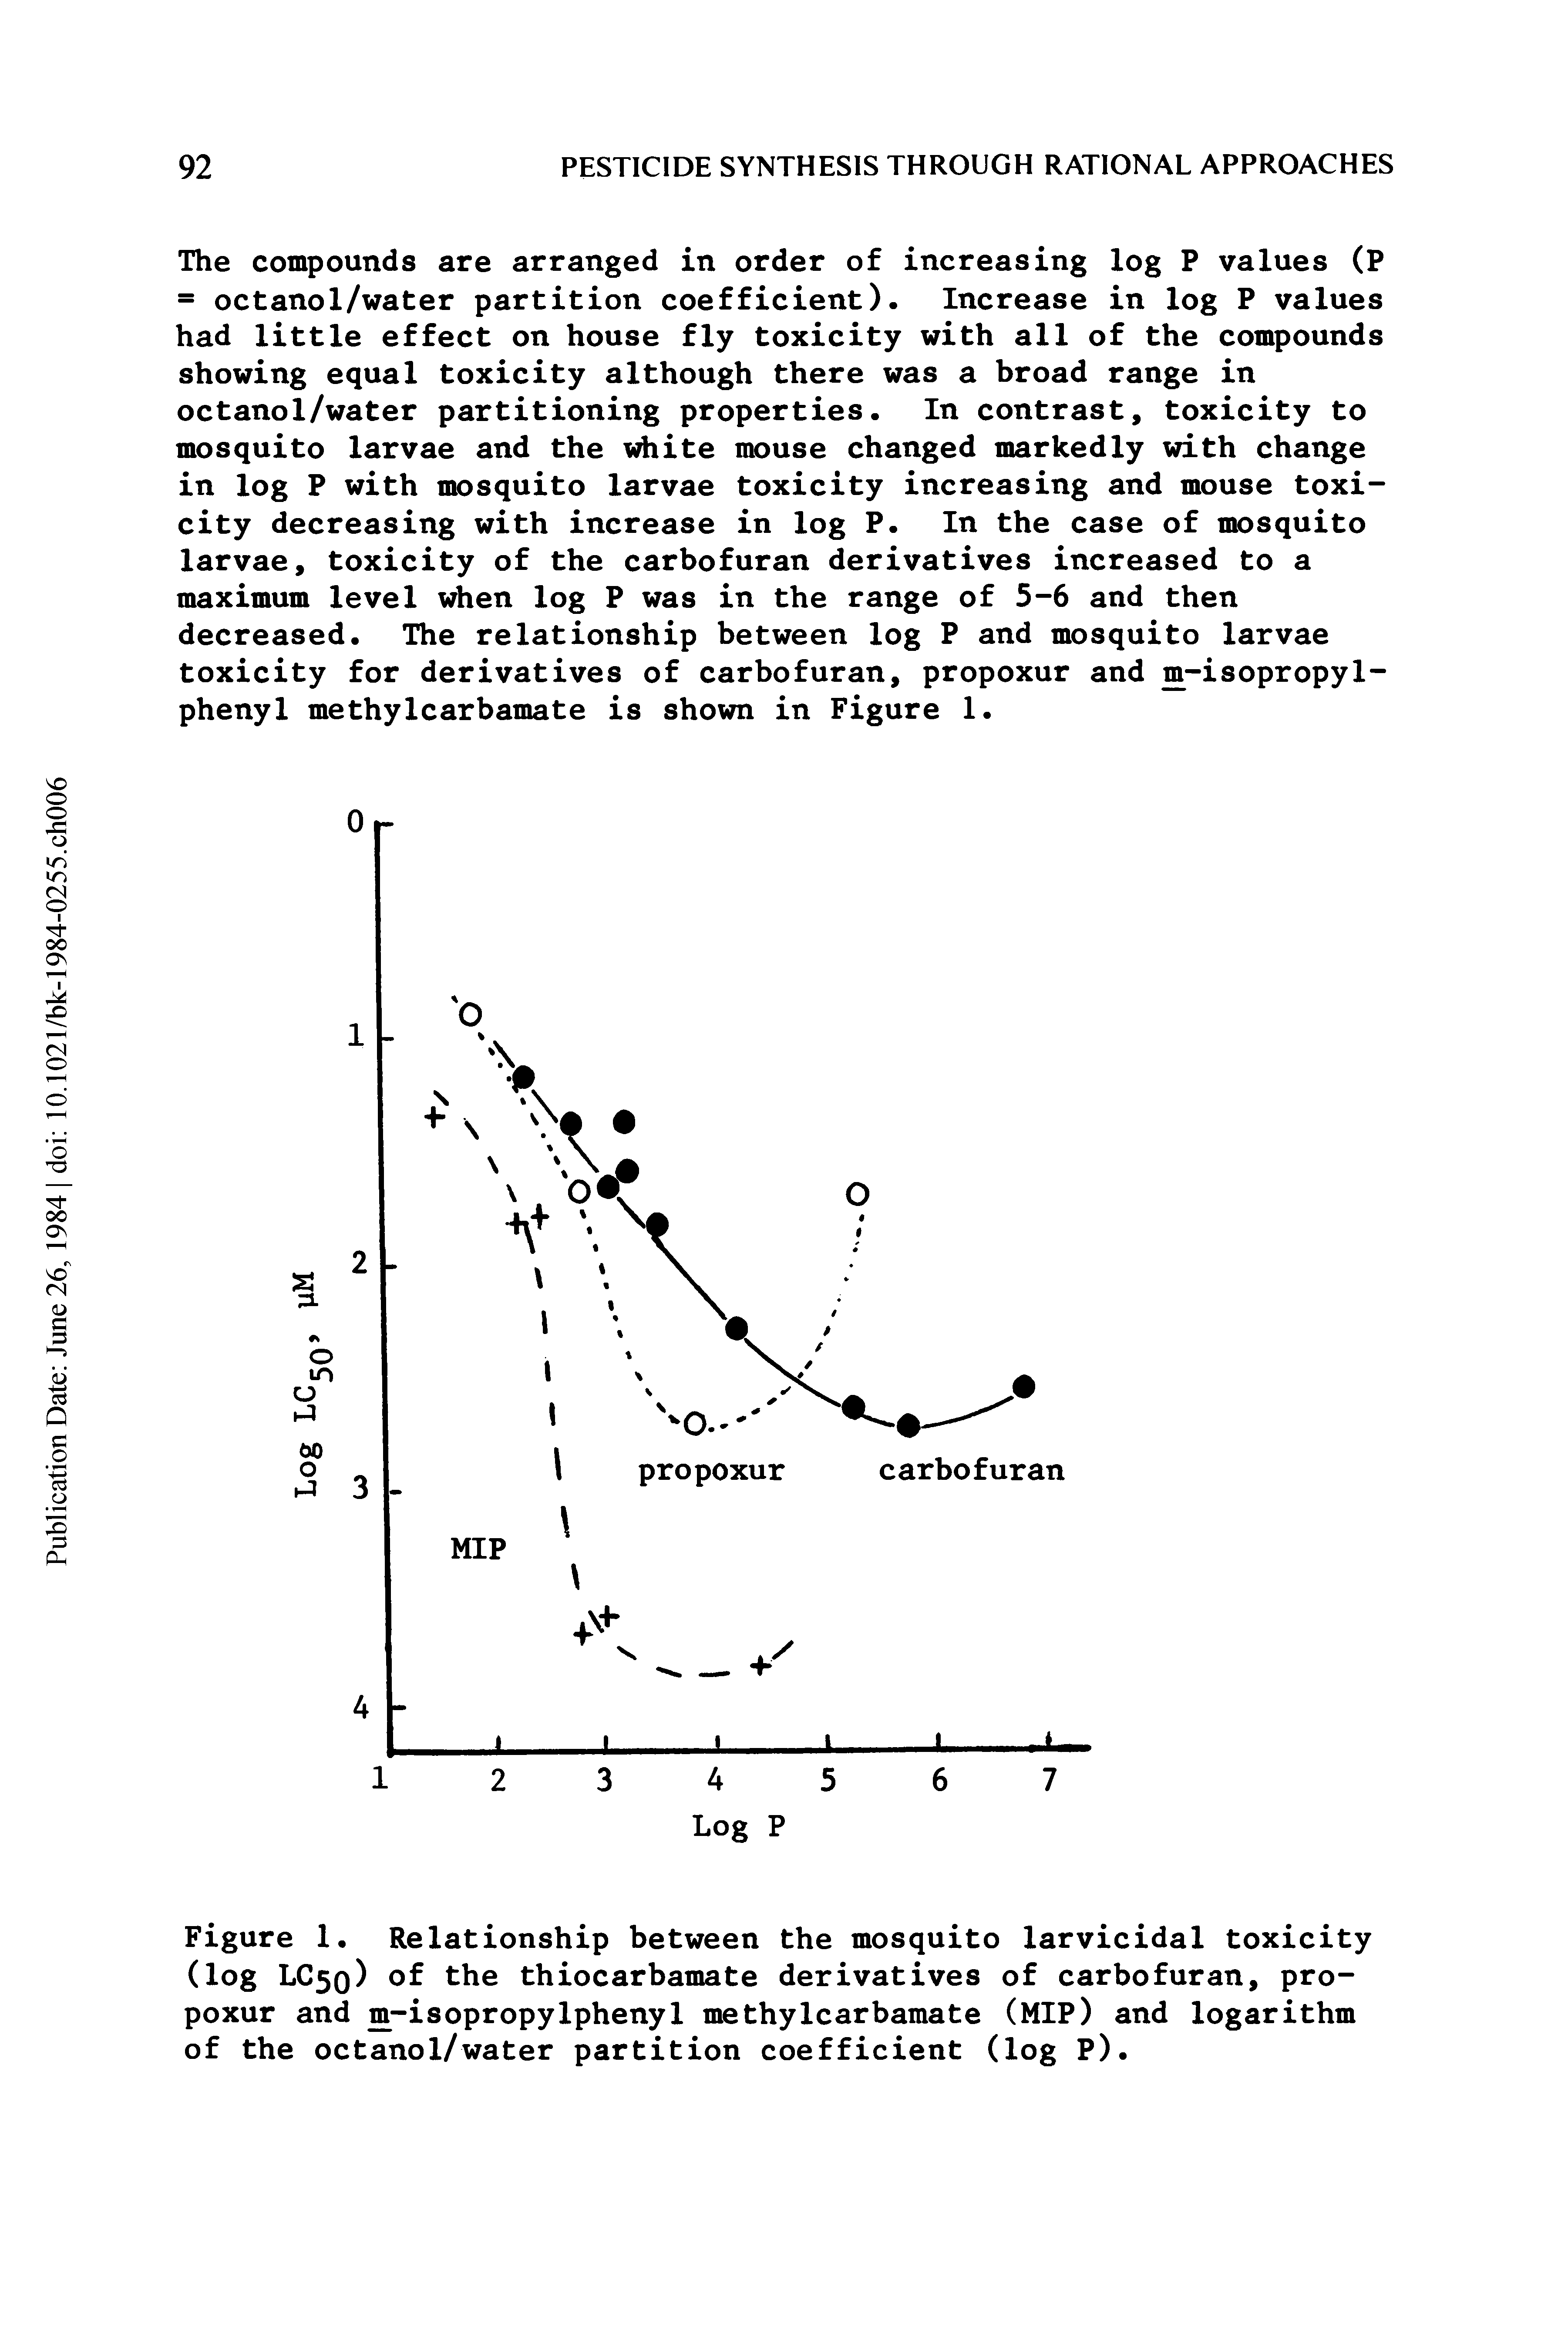 Figure 1. Relationship between the mosquito larvicidal toxicity (log LC50) of the thiocarbamate derivatives of carbofuran, propoxur and m-isopropylphenyl methylcarbamate (MIP) and logarithm of the octanol/water partition coefficient (log P).